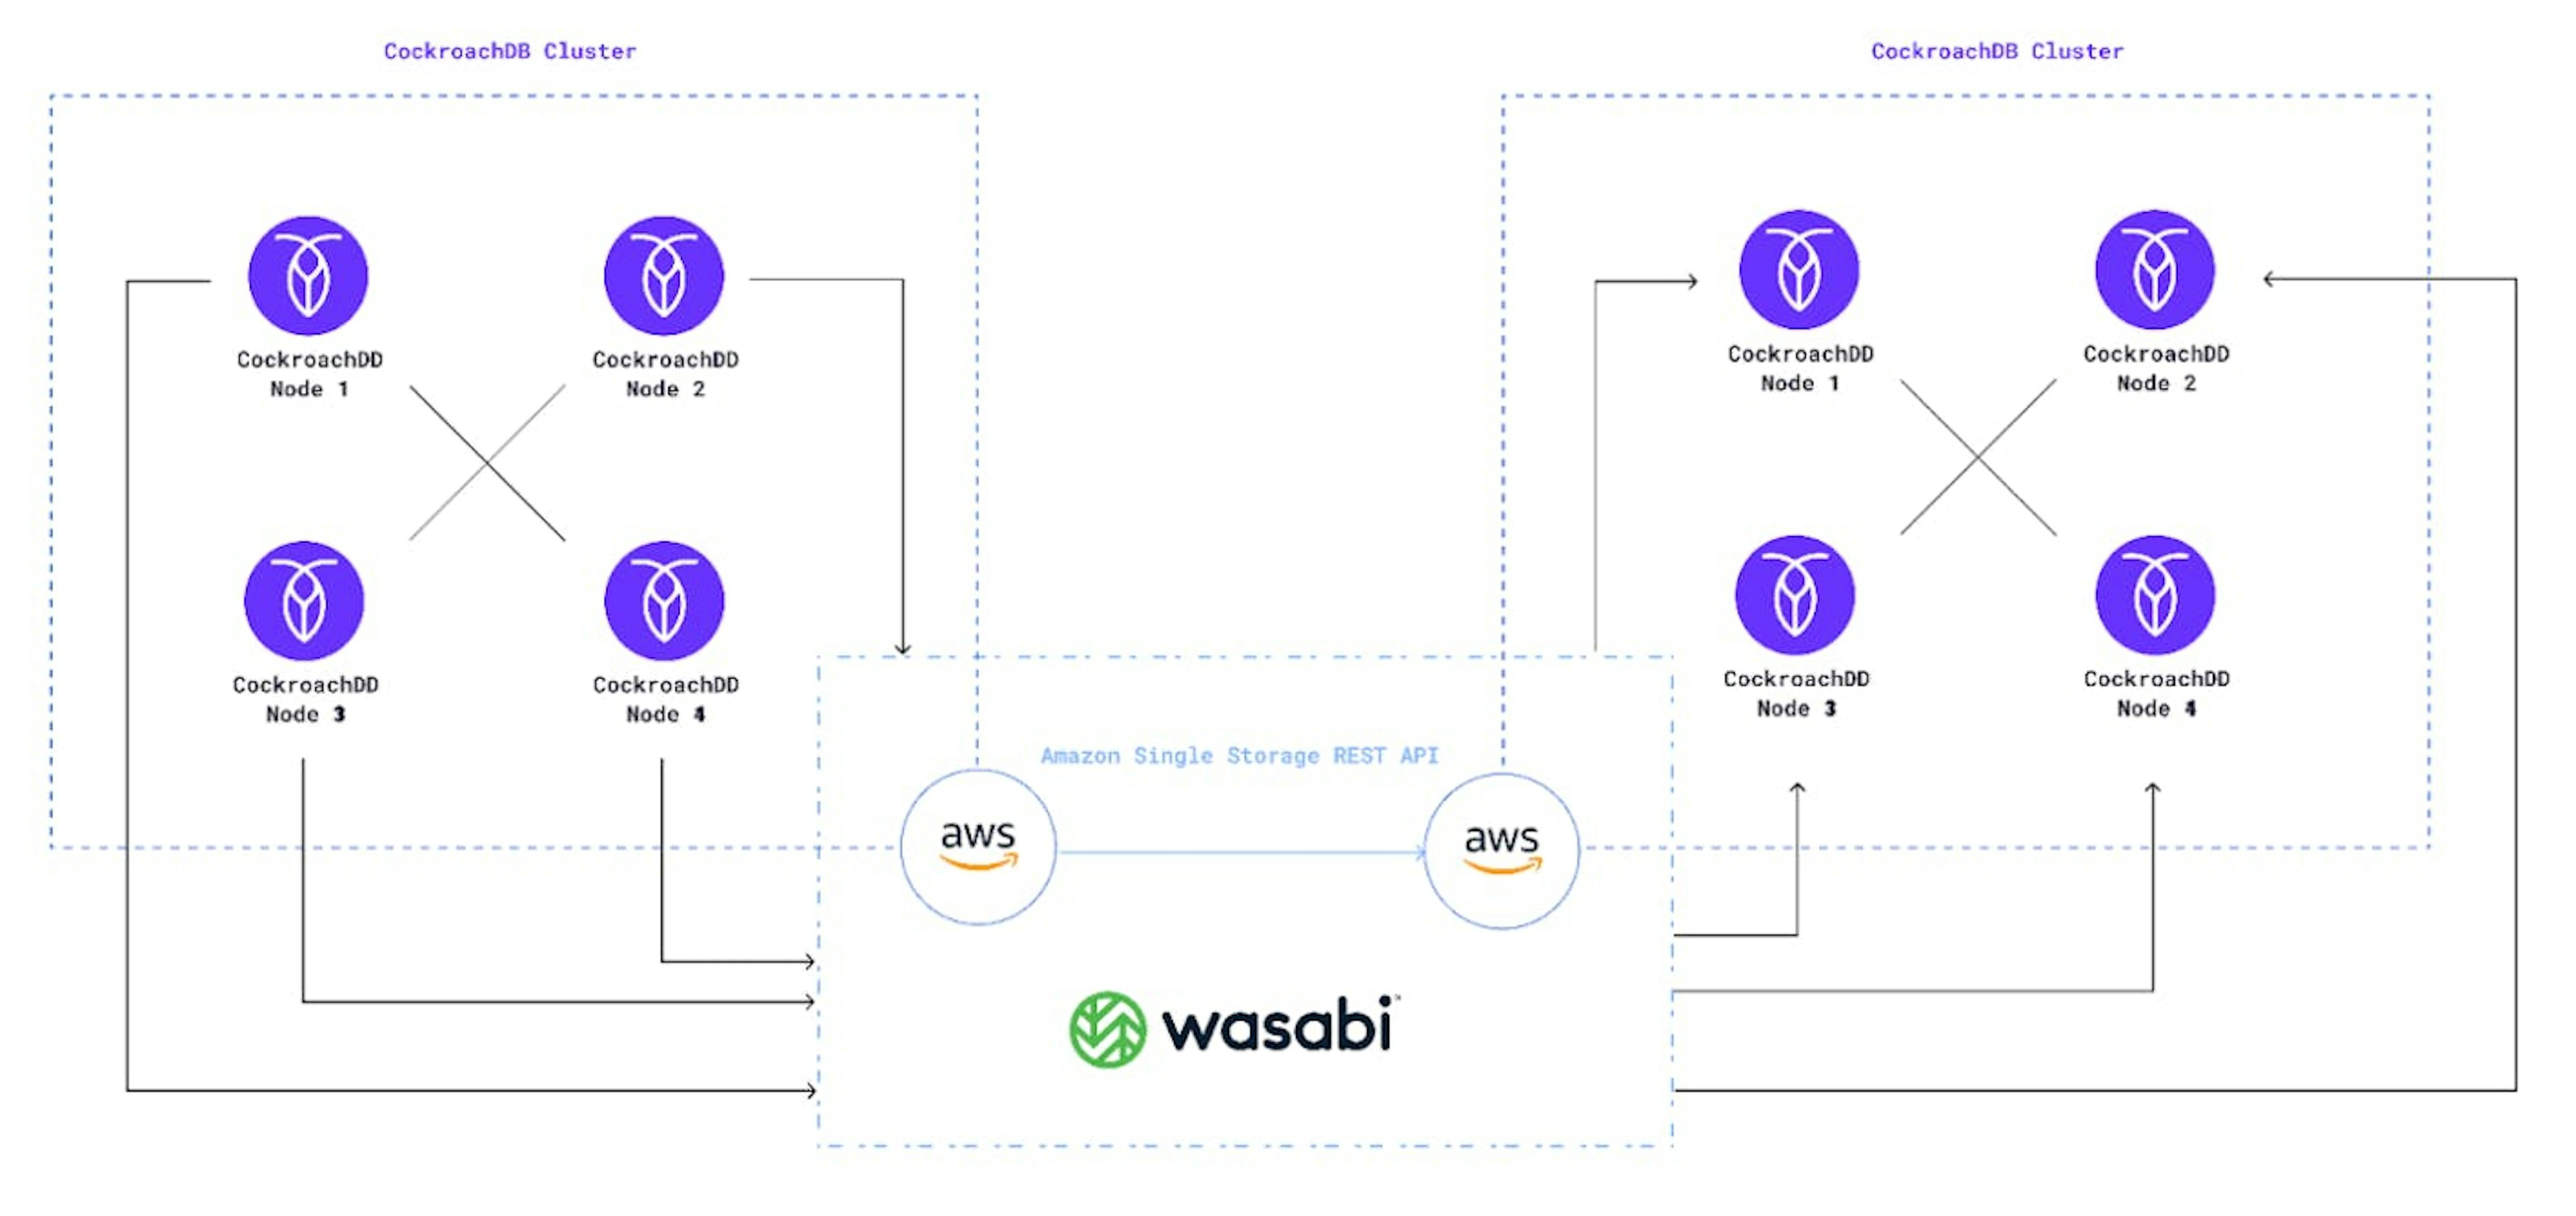 reduce-storage-costs-with-wasabi-and-cockroachdb